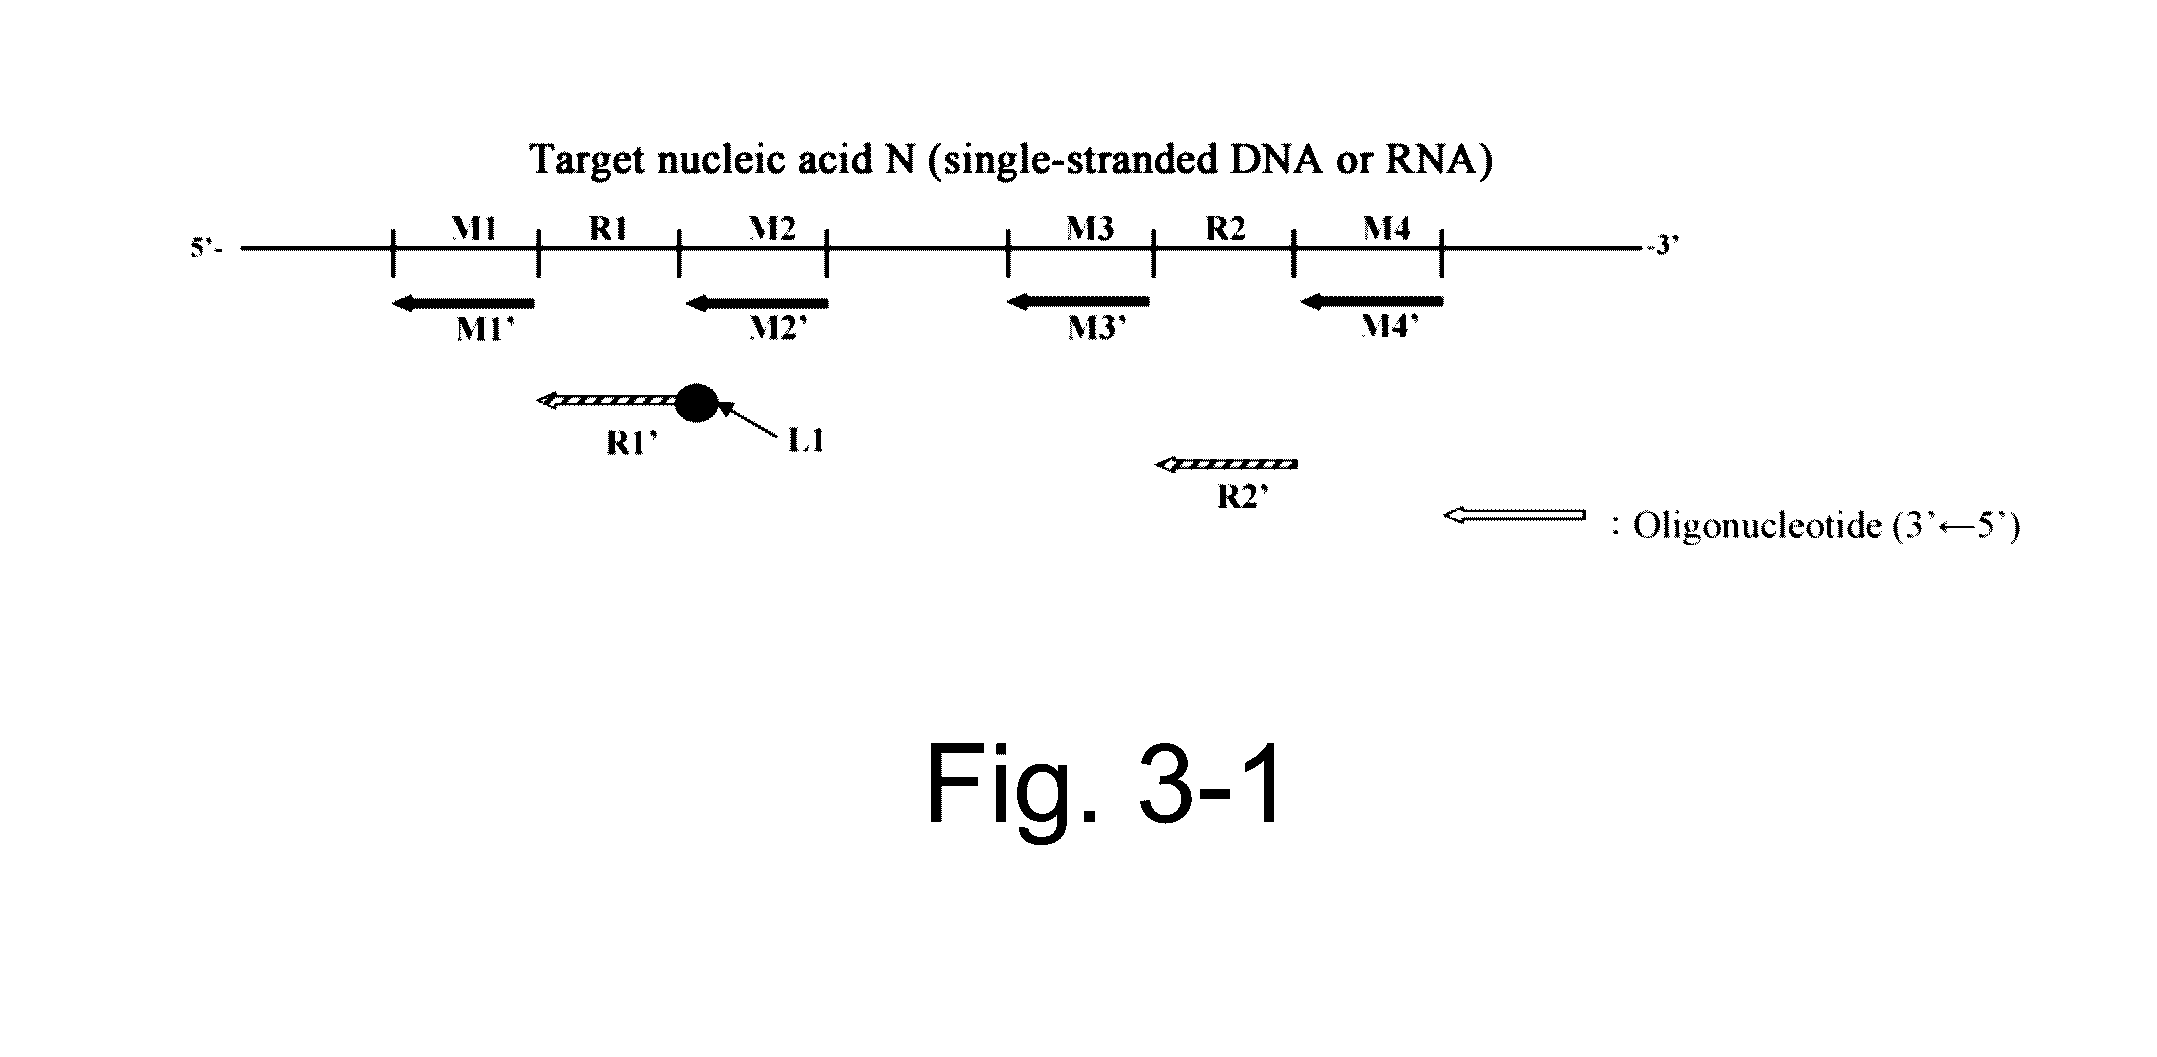 Nucleic acid detection or quantification method using mask oligonucleotide, and device for same